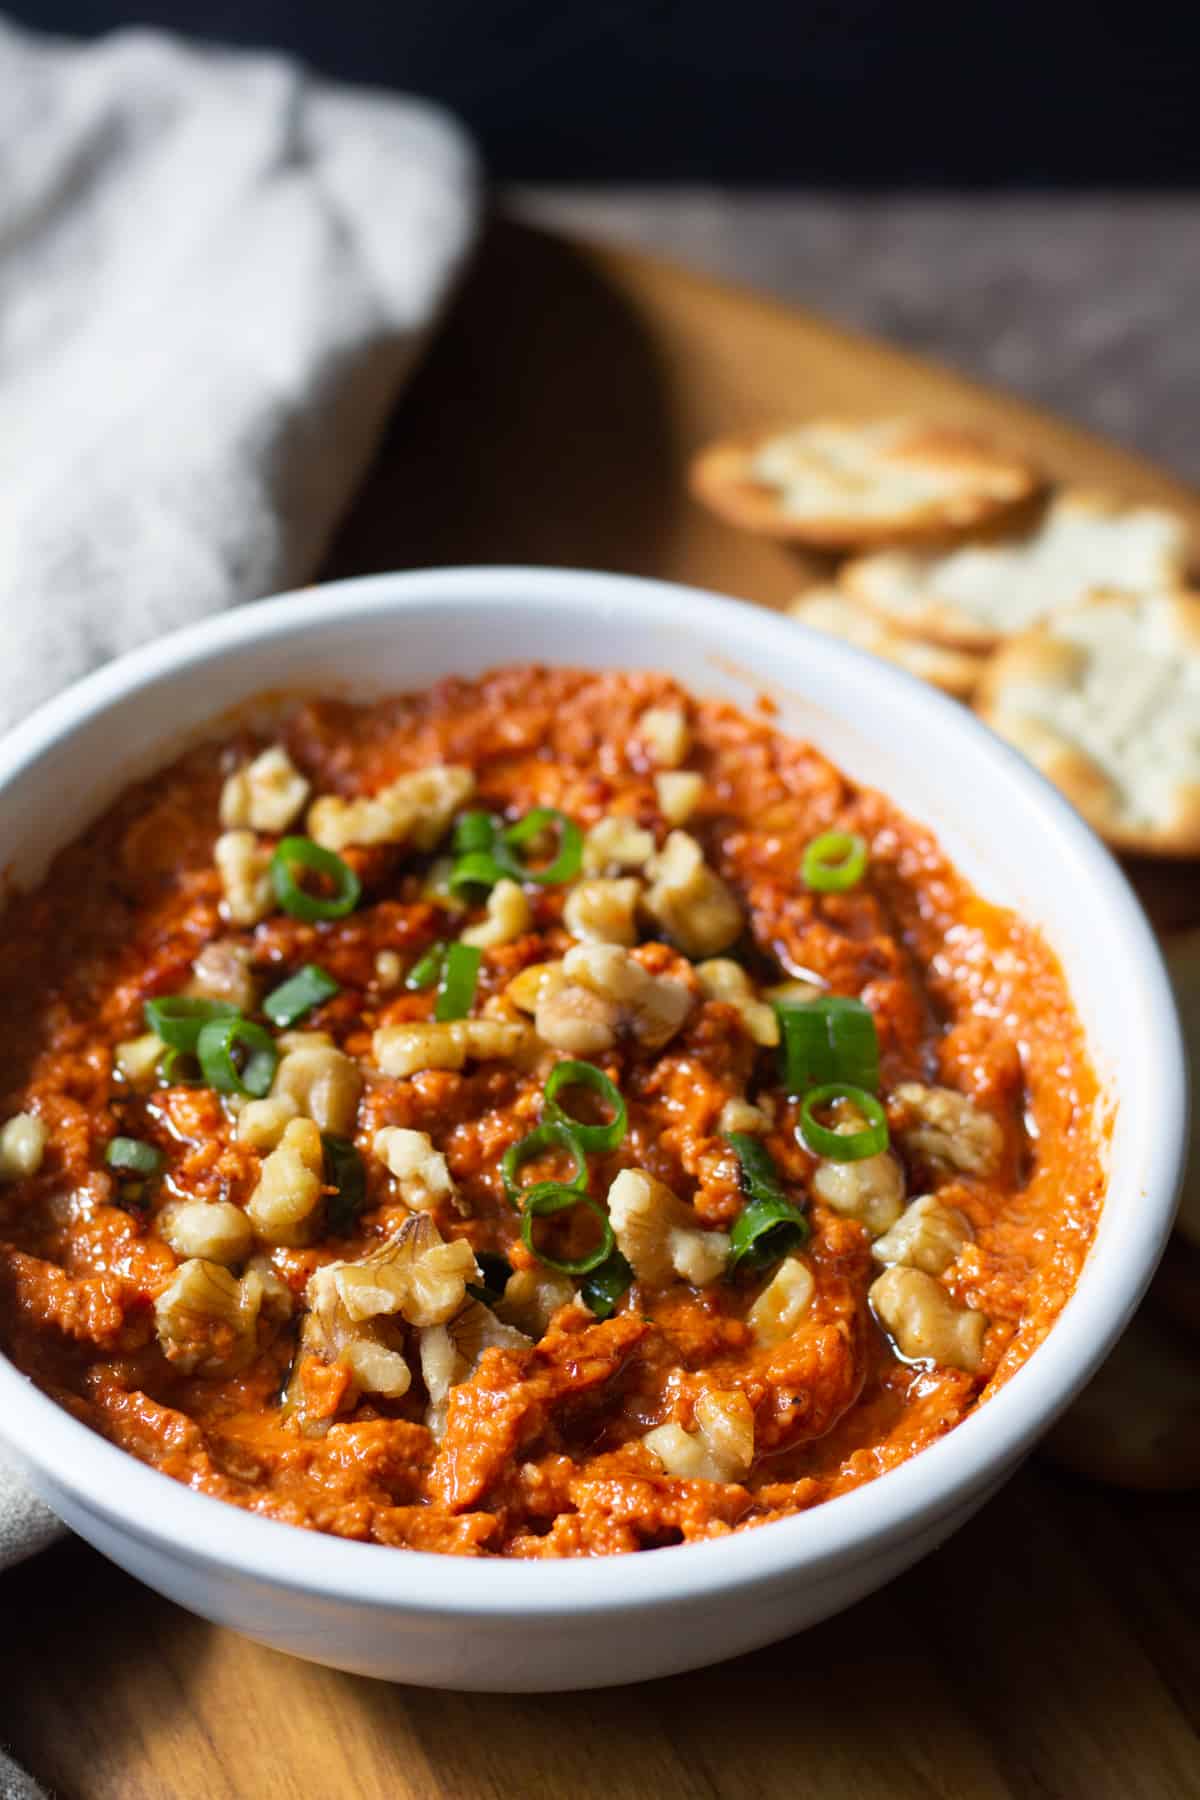 Muhammara is a tasty roasted red pepper dip from Aleppo, Syria. This classic Muhammara recipe is made with roasted red peppers, walnuts and olive oil.
